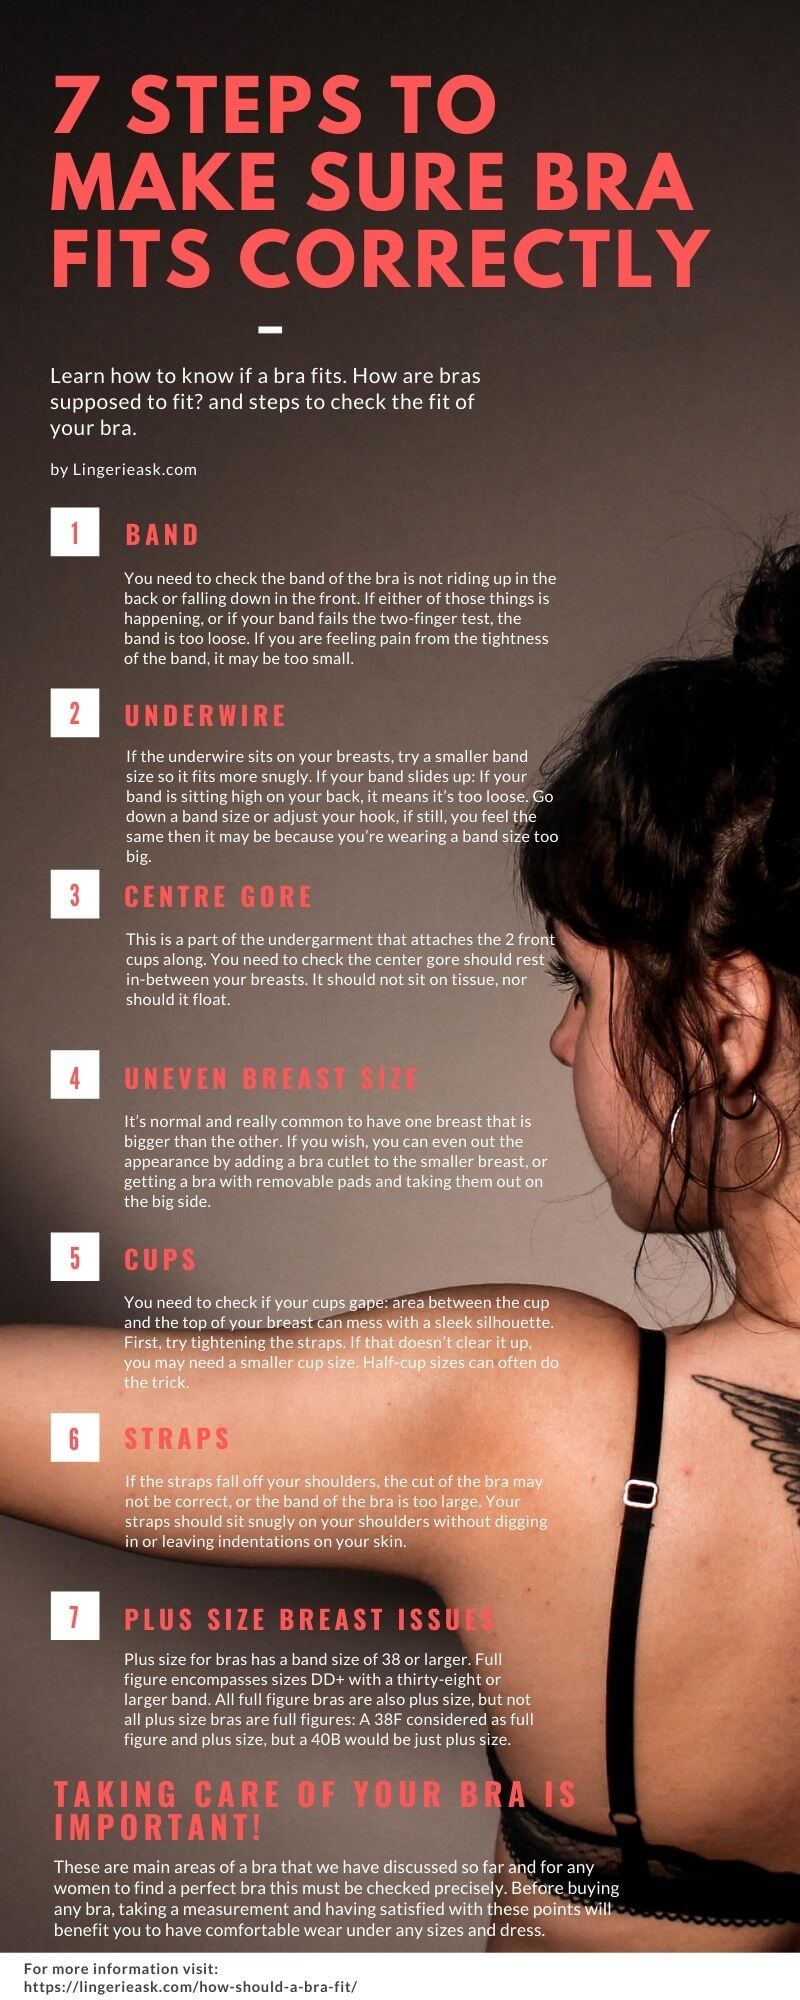 7 Steps to make sure bra fits correctly and is not too small or too large